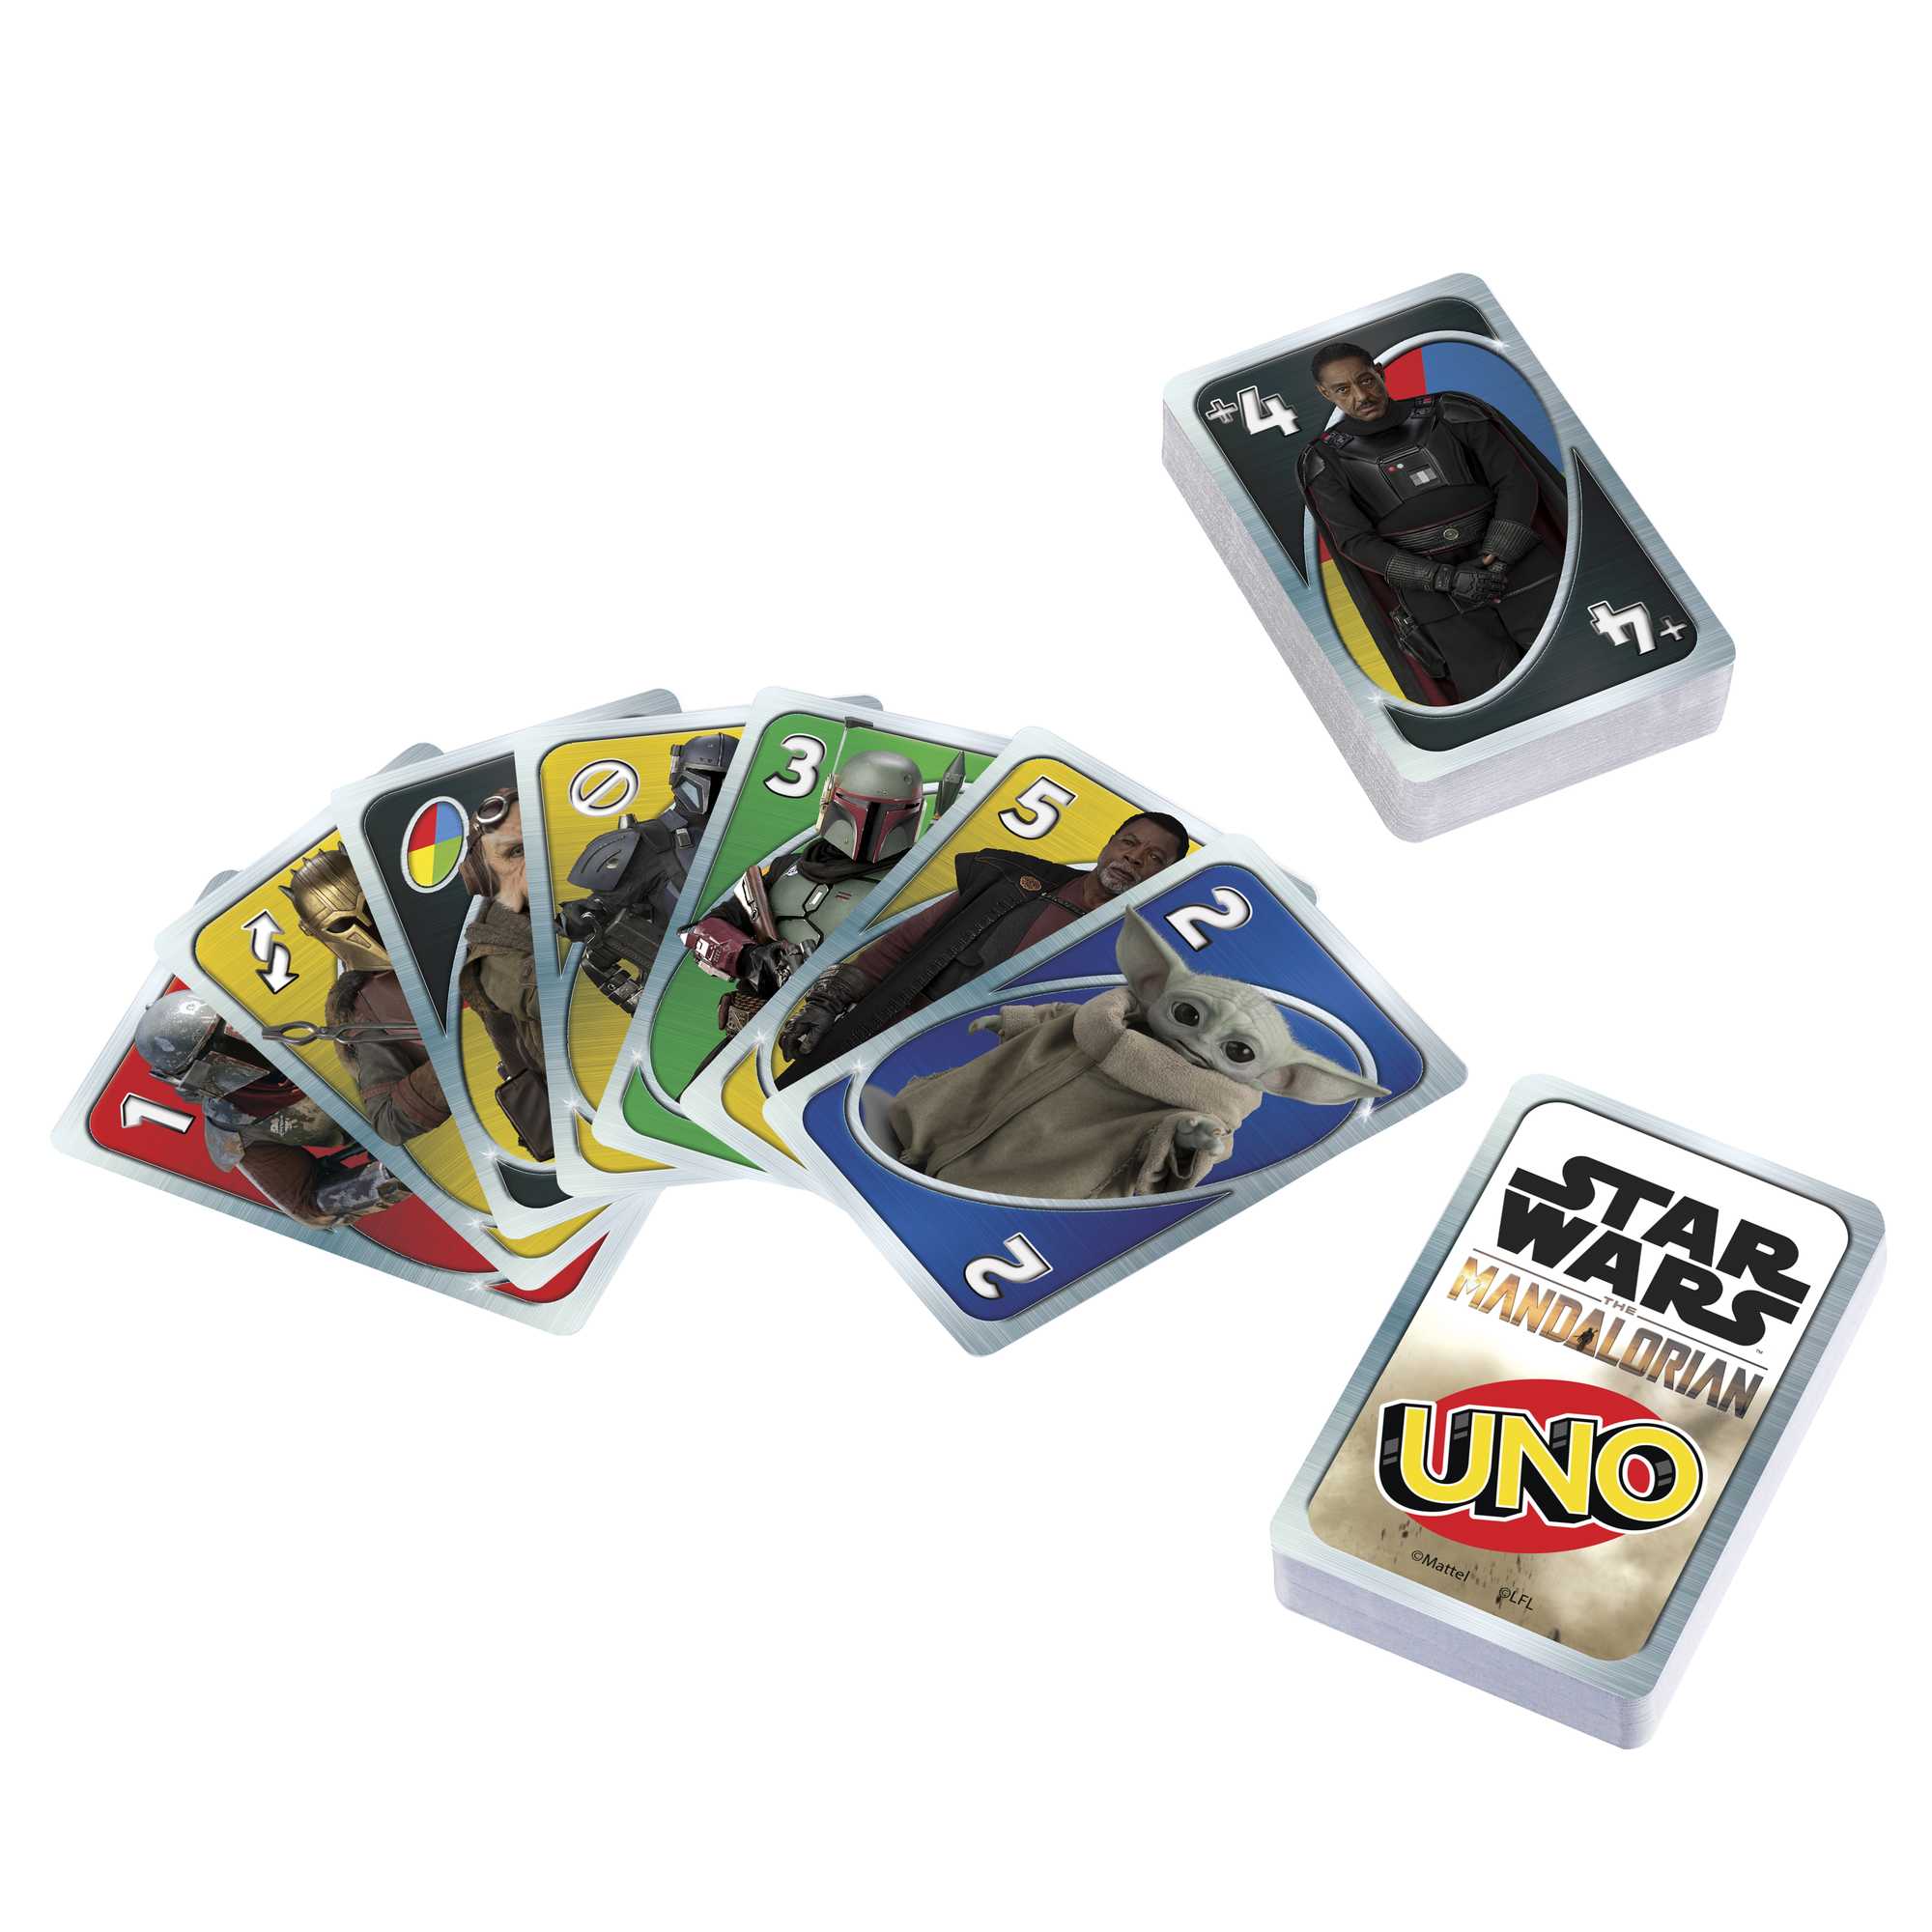 Mattel Games UNO Star Wars Card Game for Kids & Family with Themed